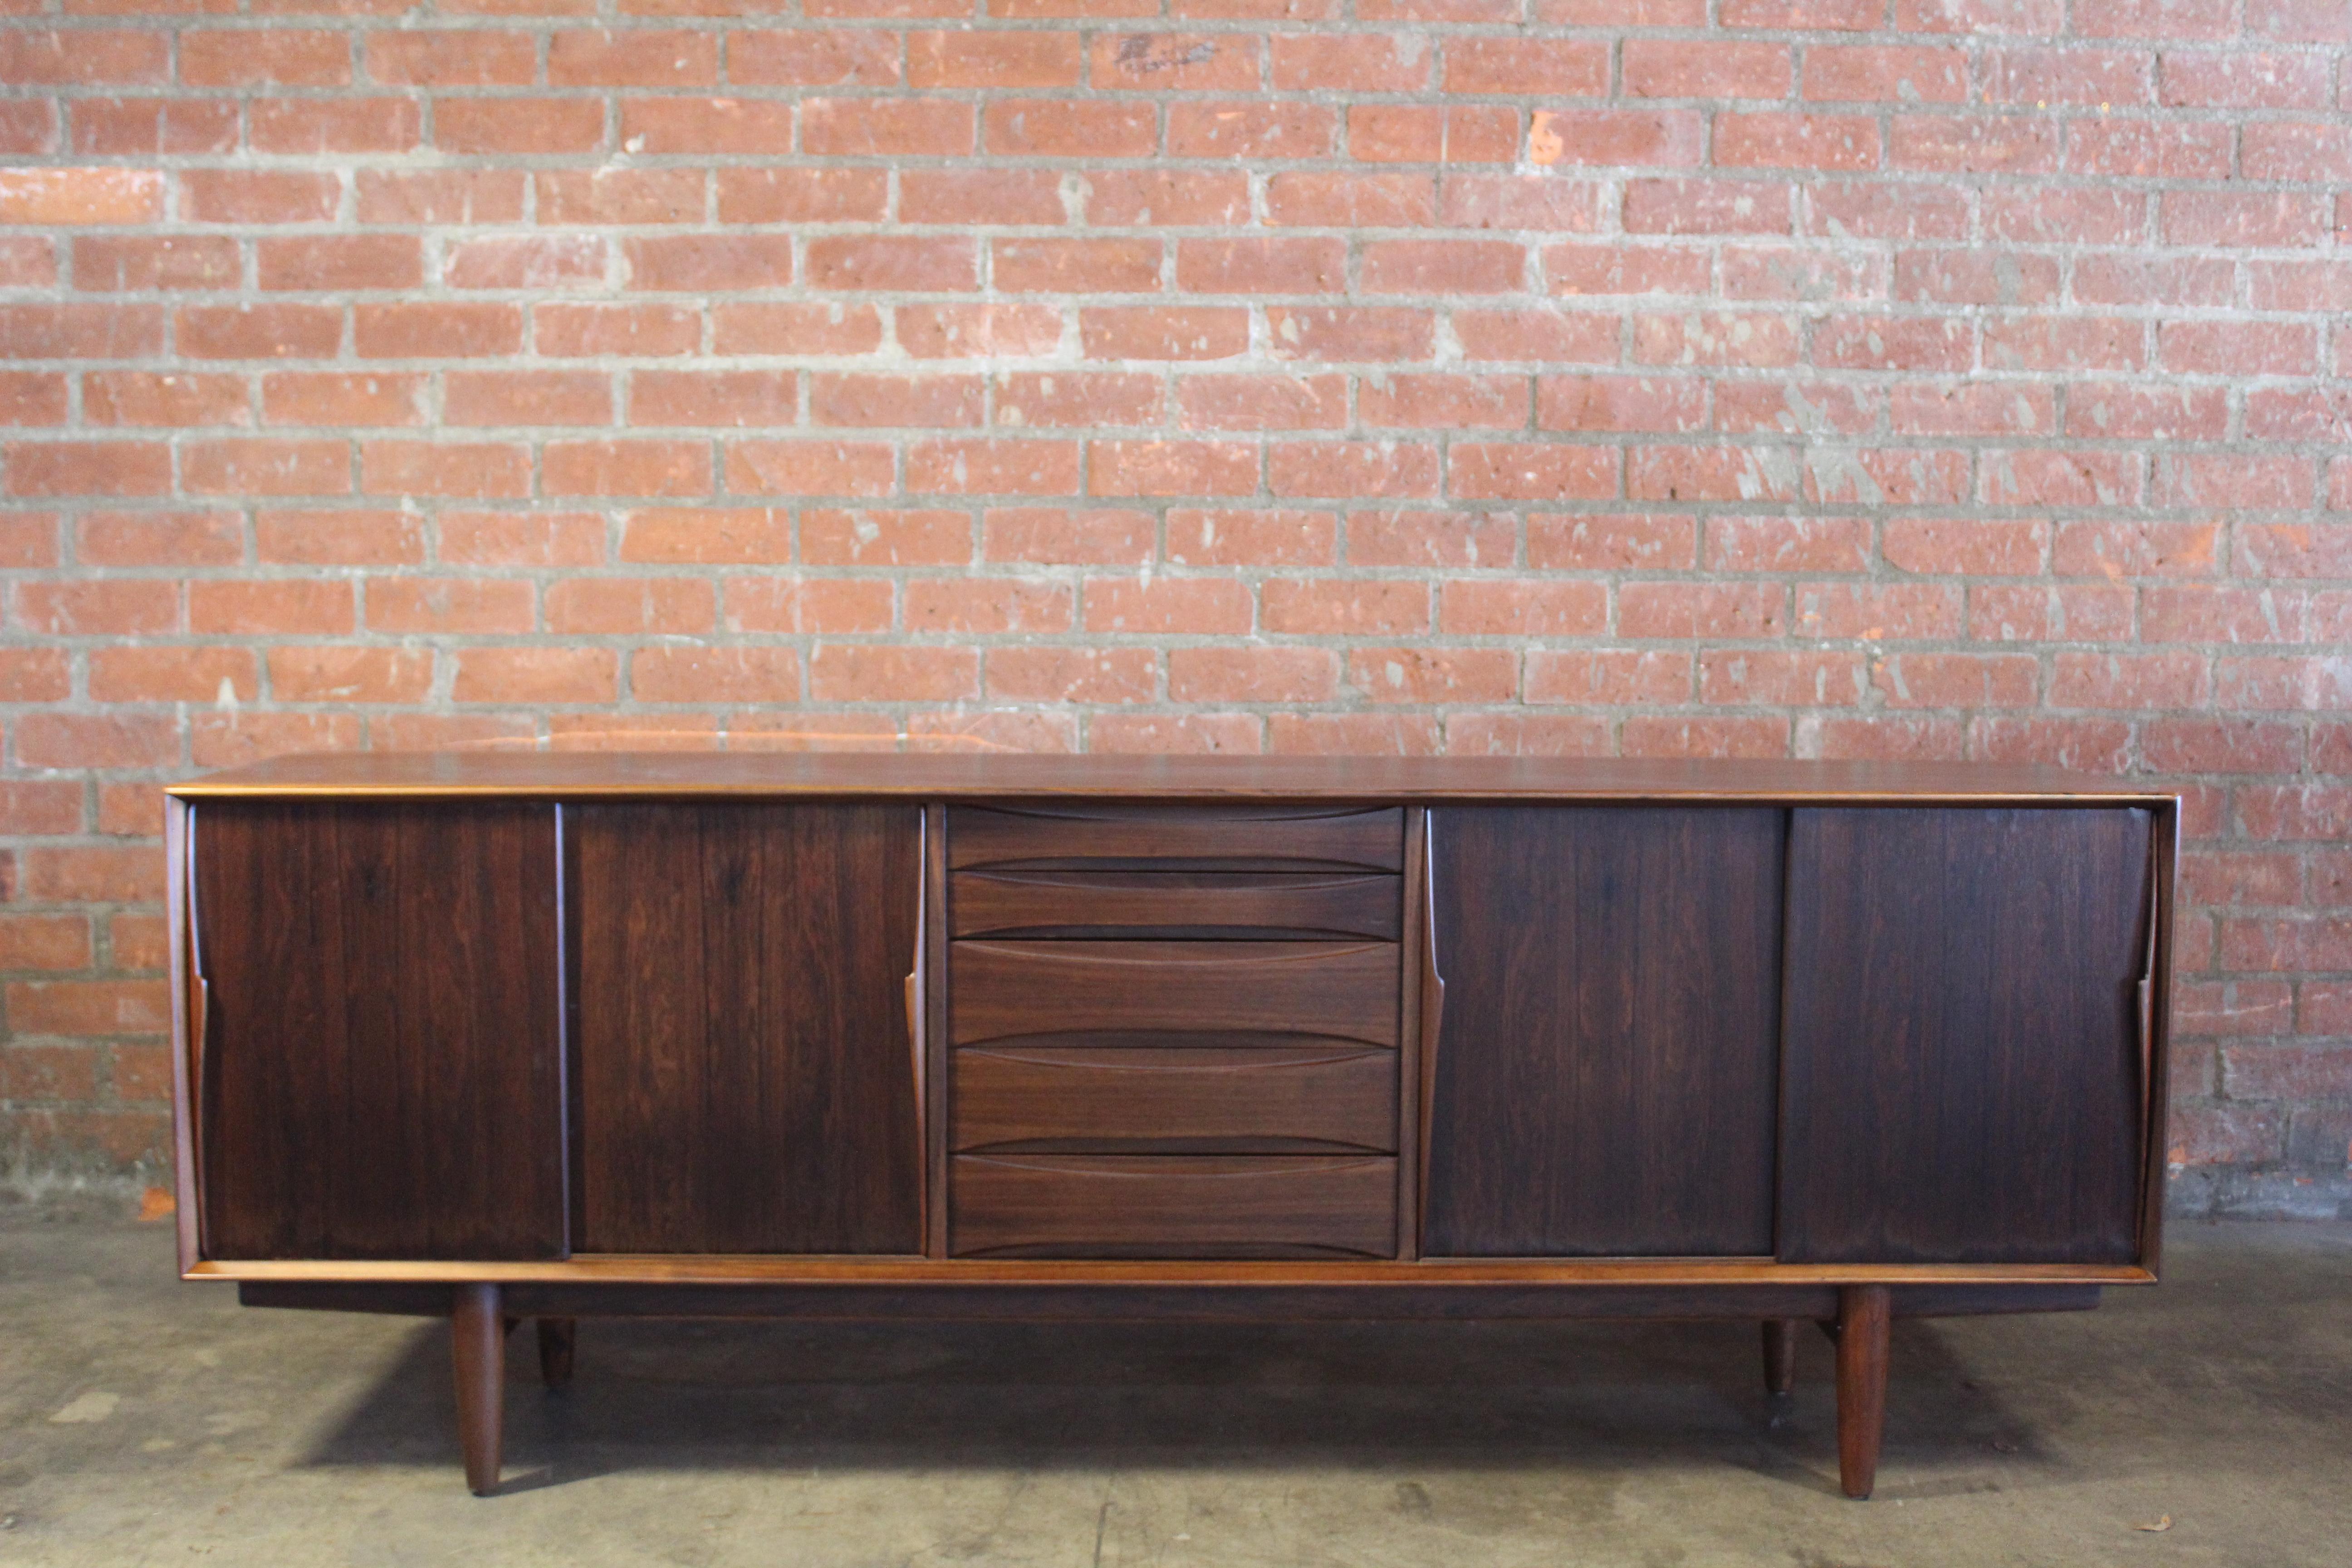 A mid-century rosewood credenza designed by Arne Vodder, Denmark, 1960s. In good condition and recently refinished and restored. Features five drawers, sliding doors and adjustable interior shelves. This piece still shows some minor wear, mostly on